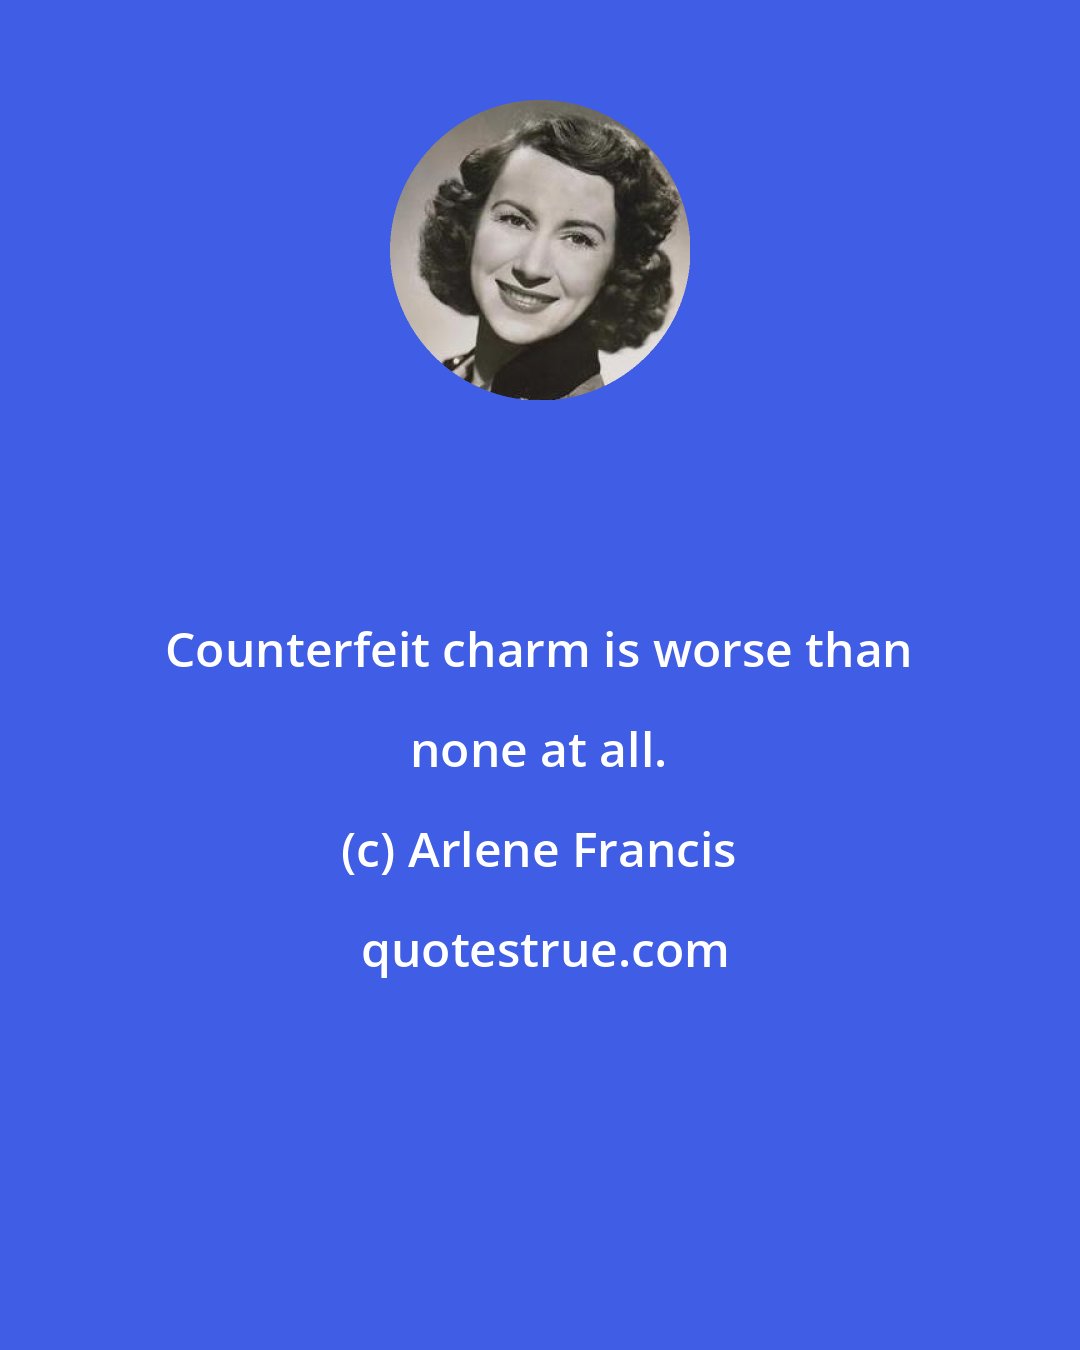 Arlene Francis: Counterfeit charm is worse than none at all.